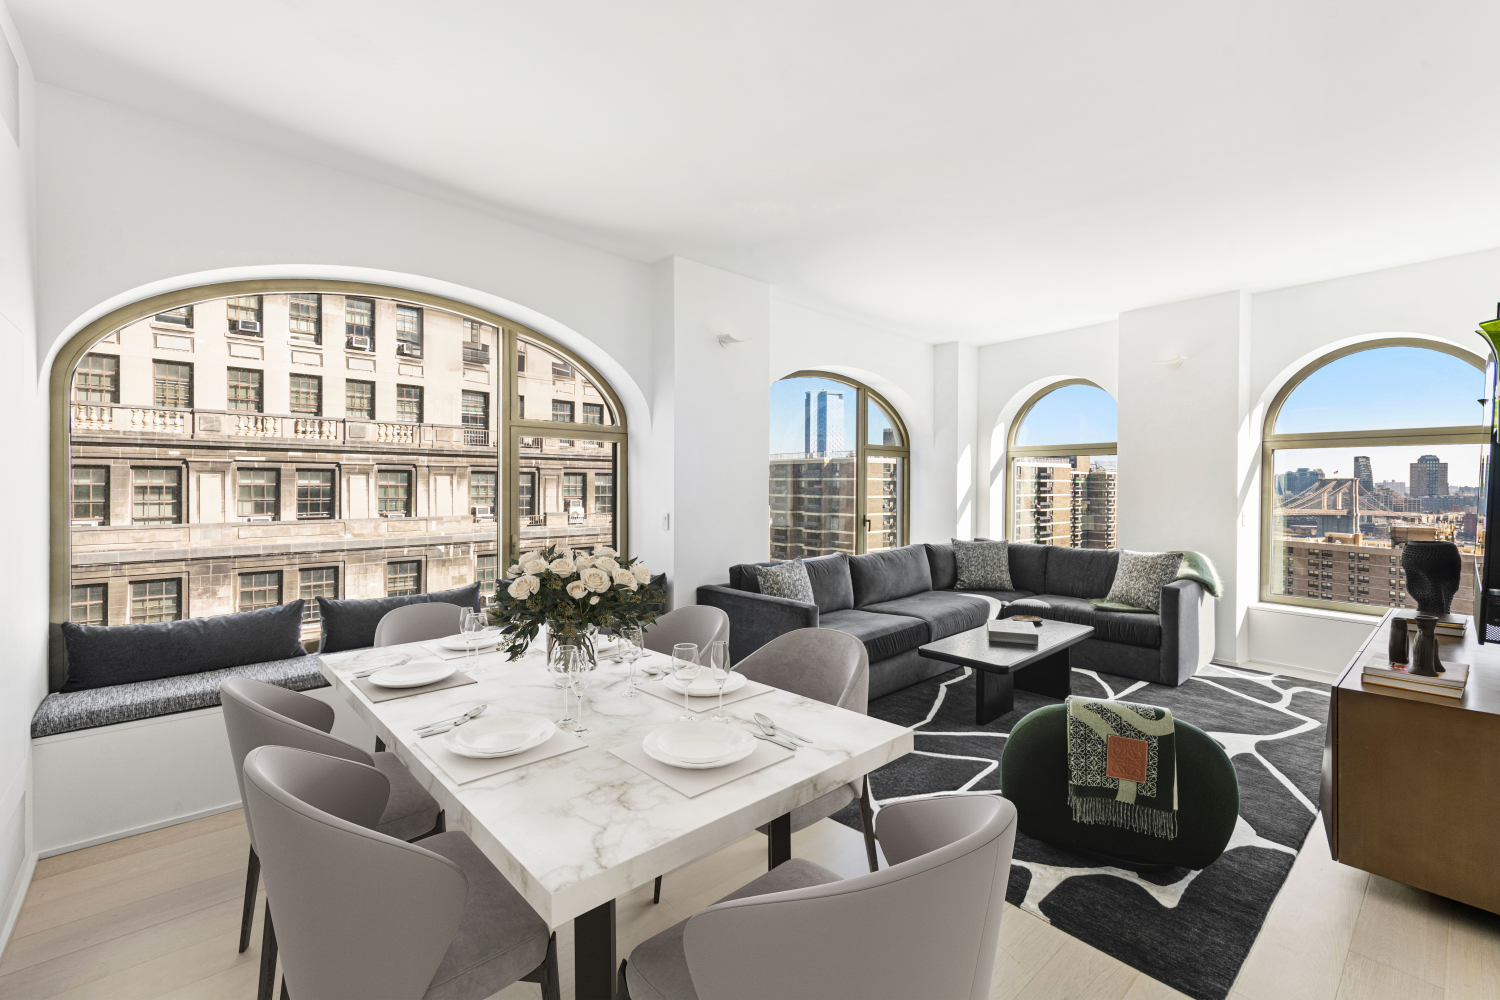 130 William Street 21B, Lower Manhattan, Downtown, NYC - 3 Bedrooms  
2 Bathrooms  
5 Rooms - 